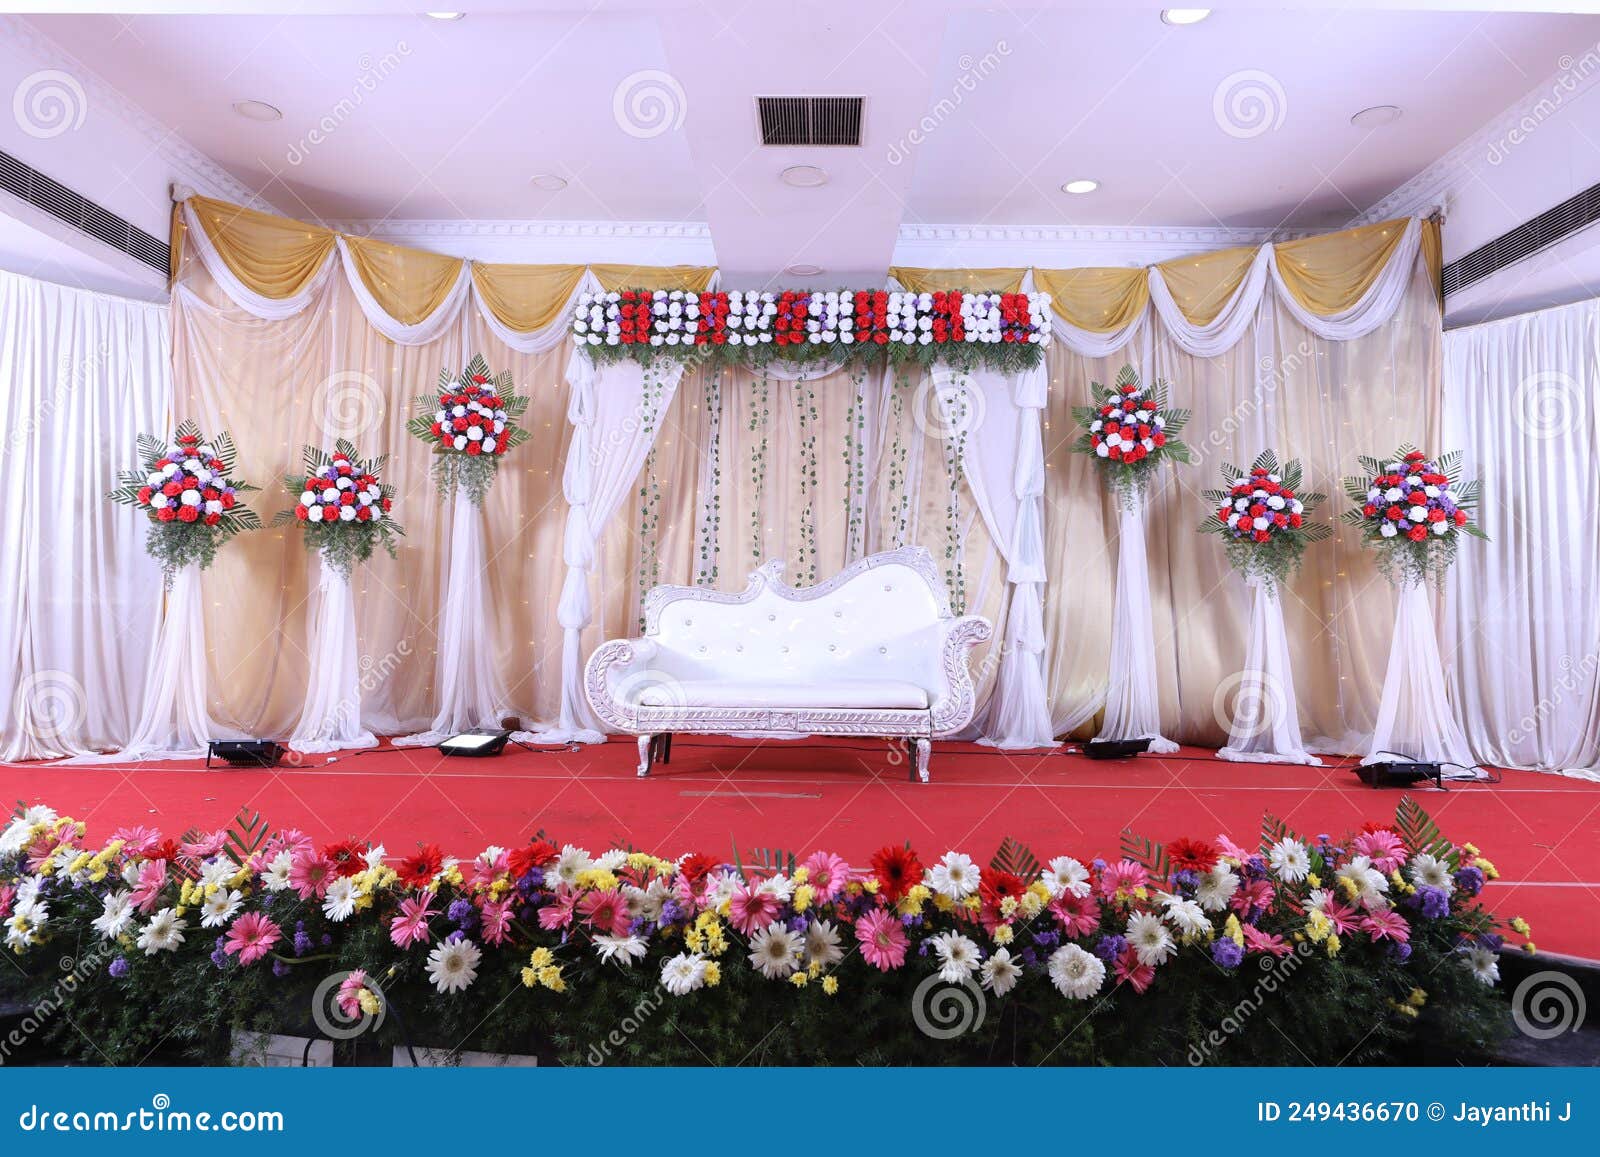 Wedding Stage Decoration with Colorful Flowers Stock Photo - Image ...